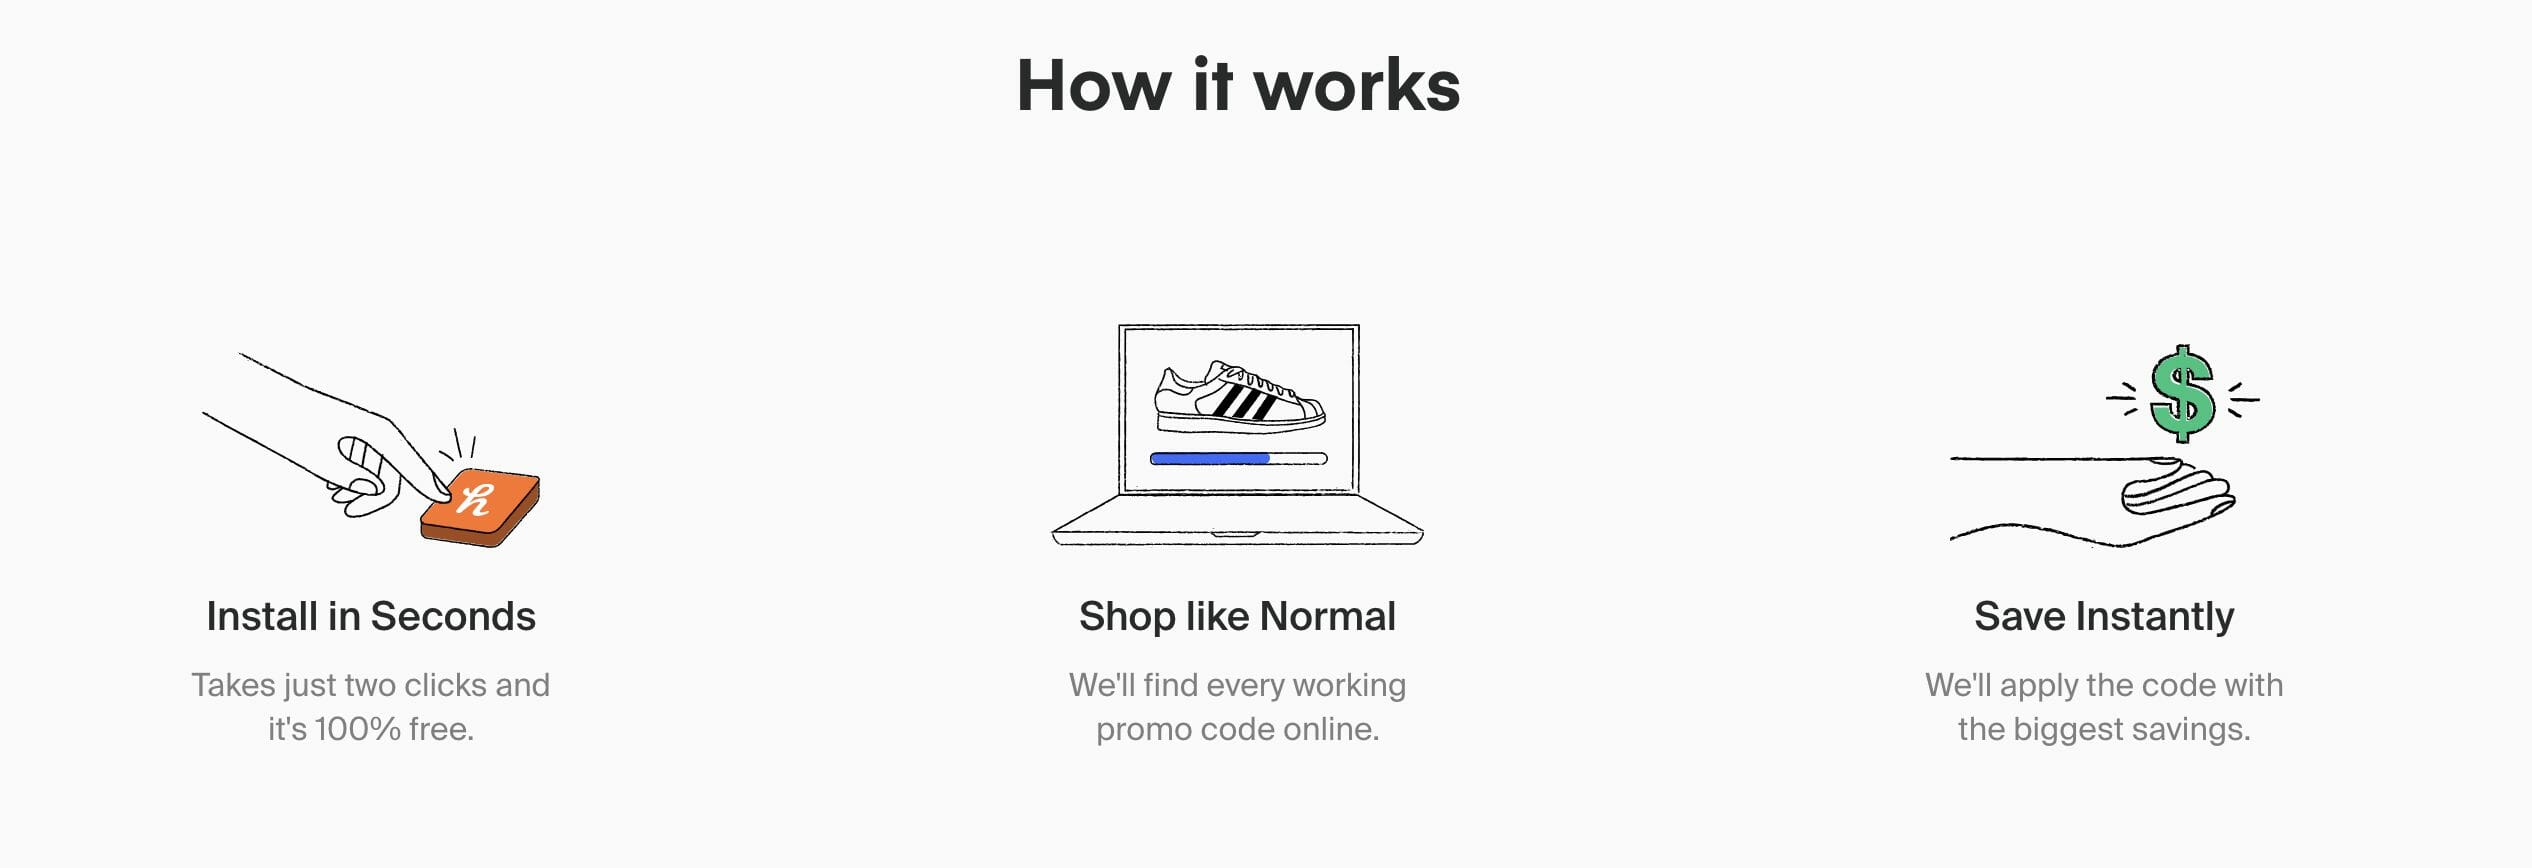 How Honey works: Install in seconds, shop like normal, save instantly.